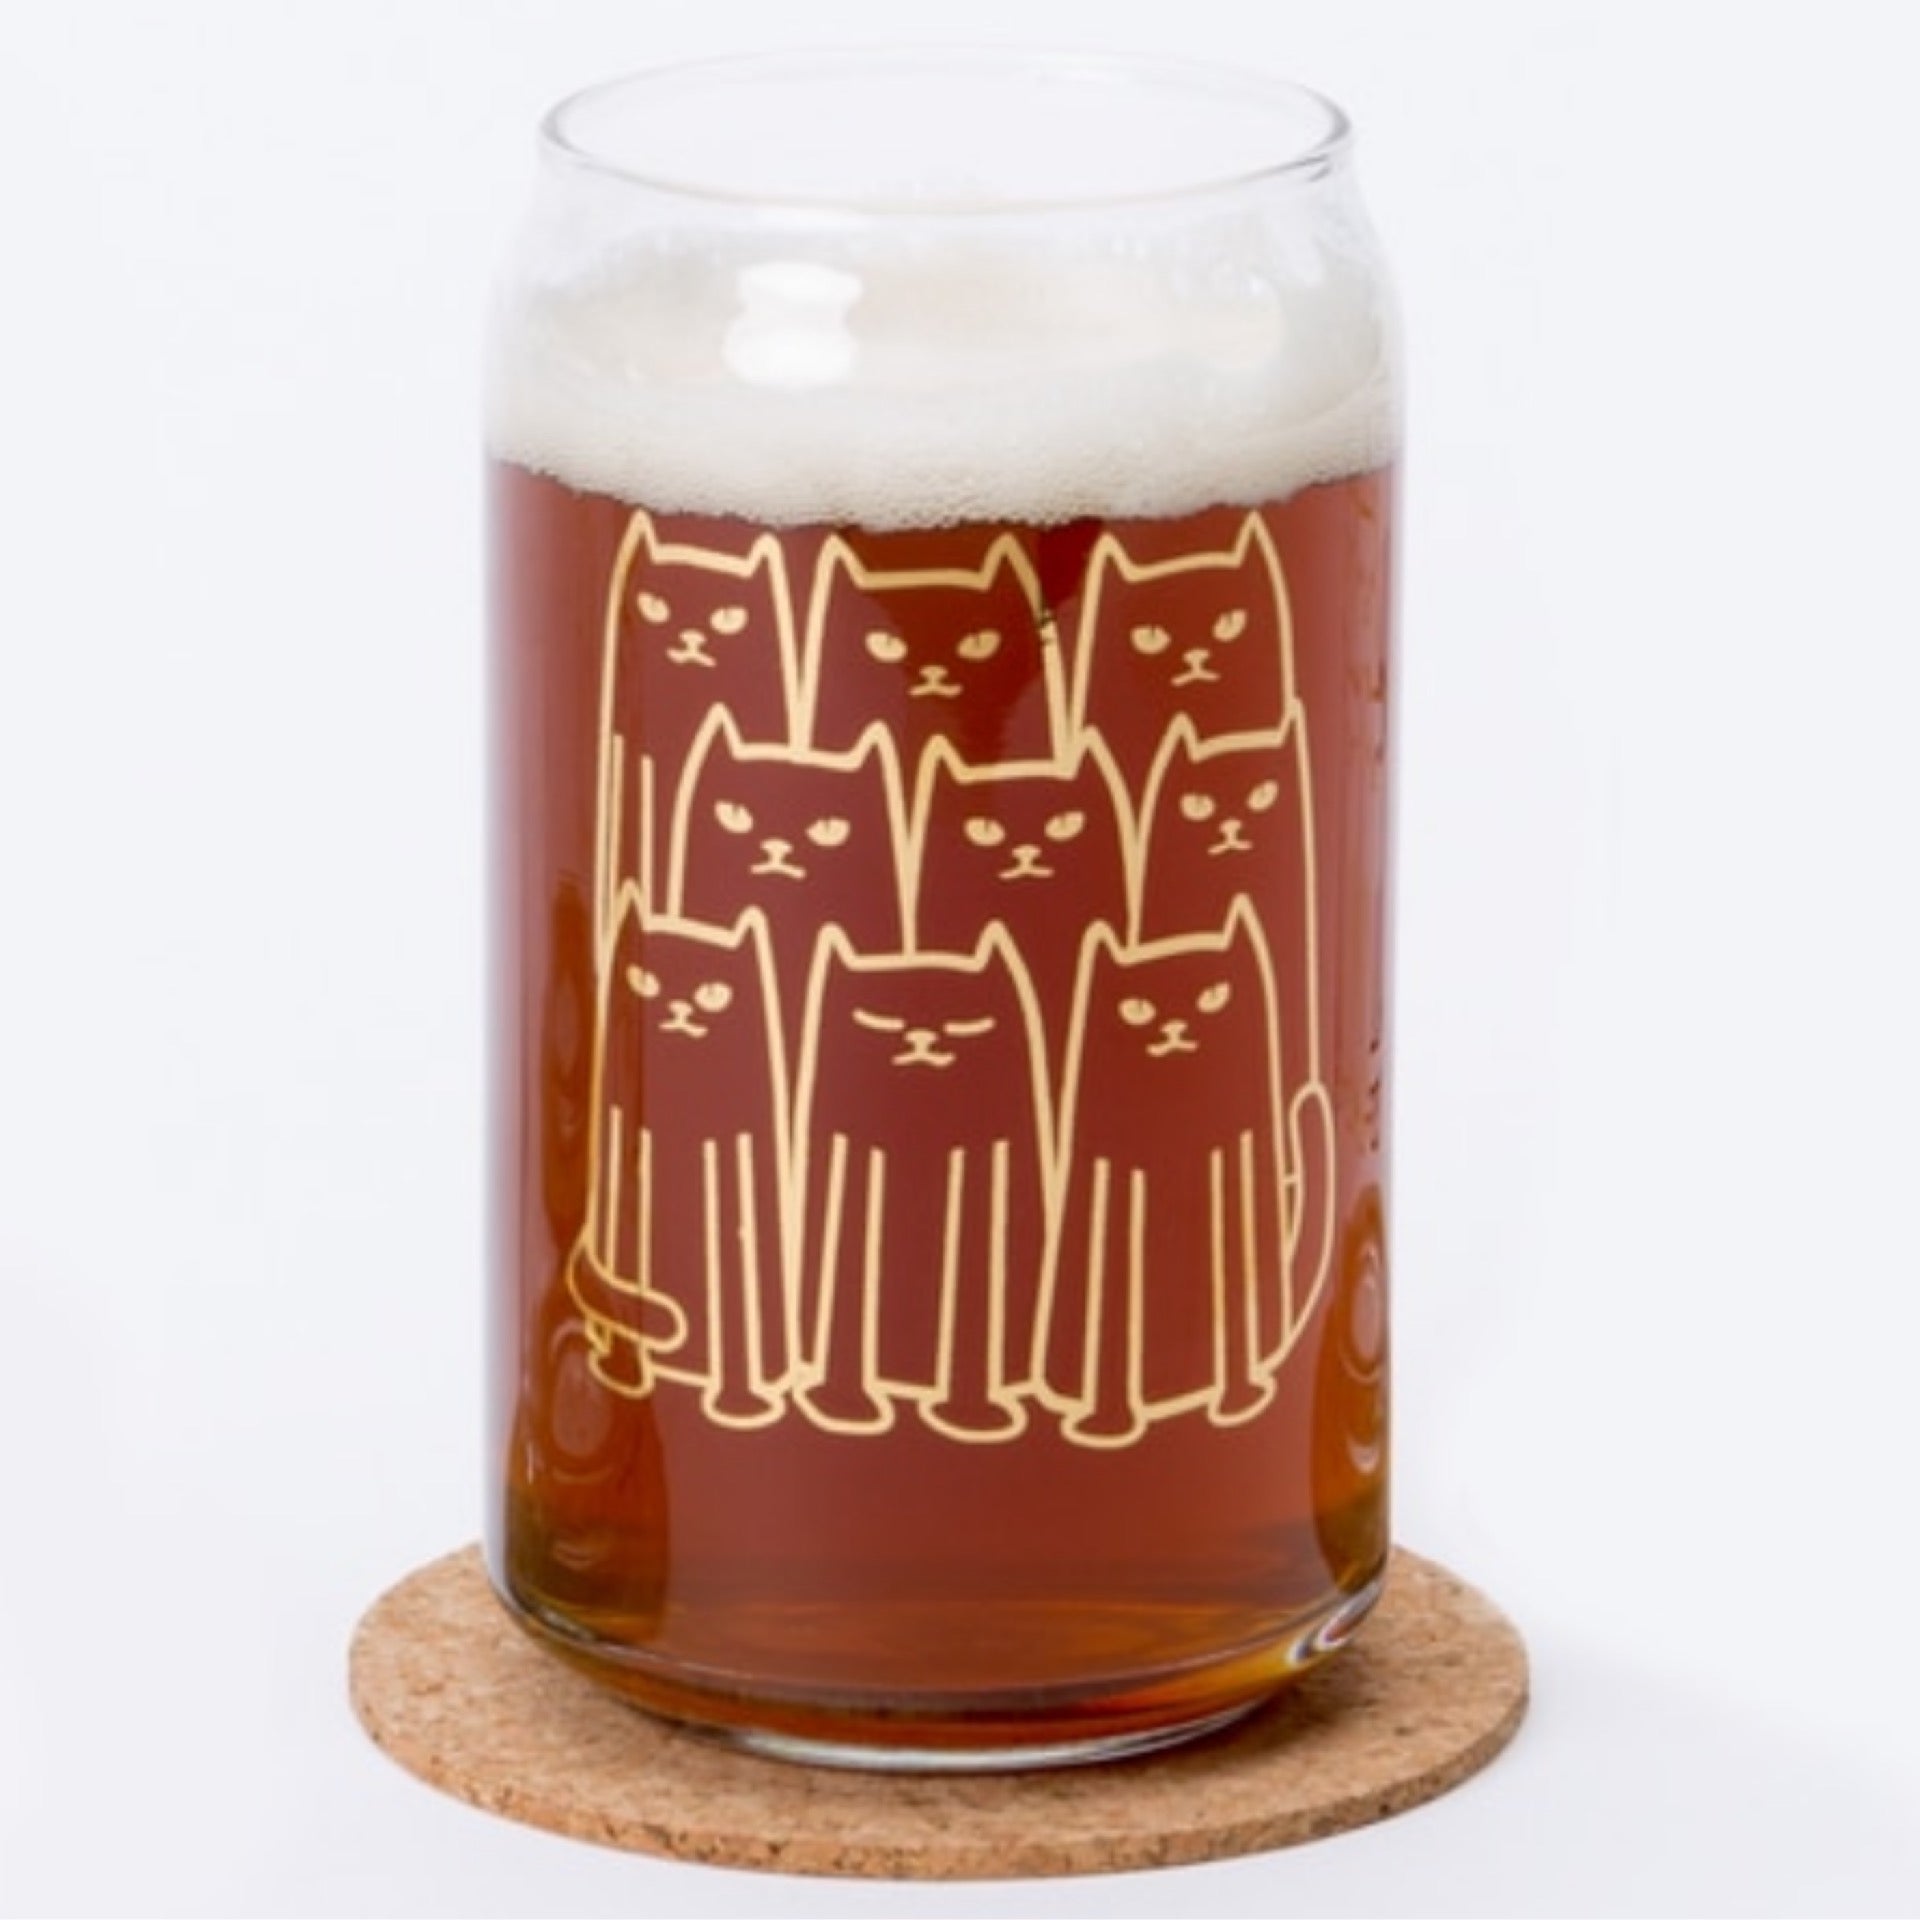 Stylish and Cool 16 oz. Can Shaped Beer Glass